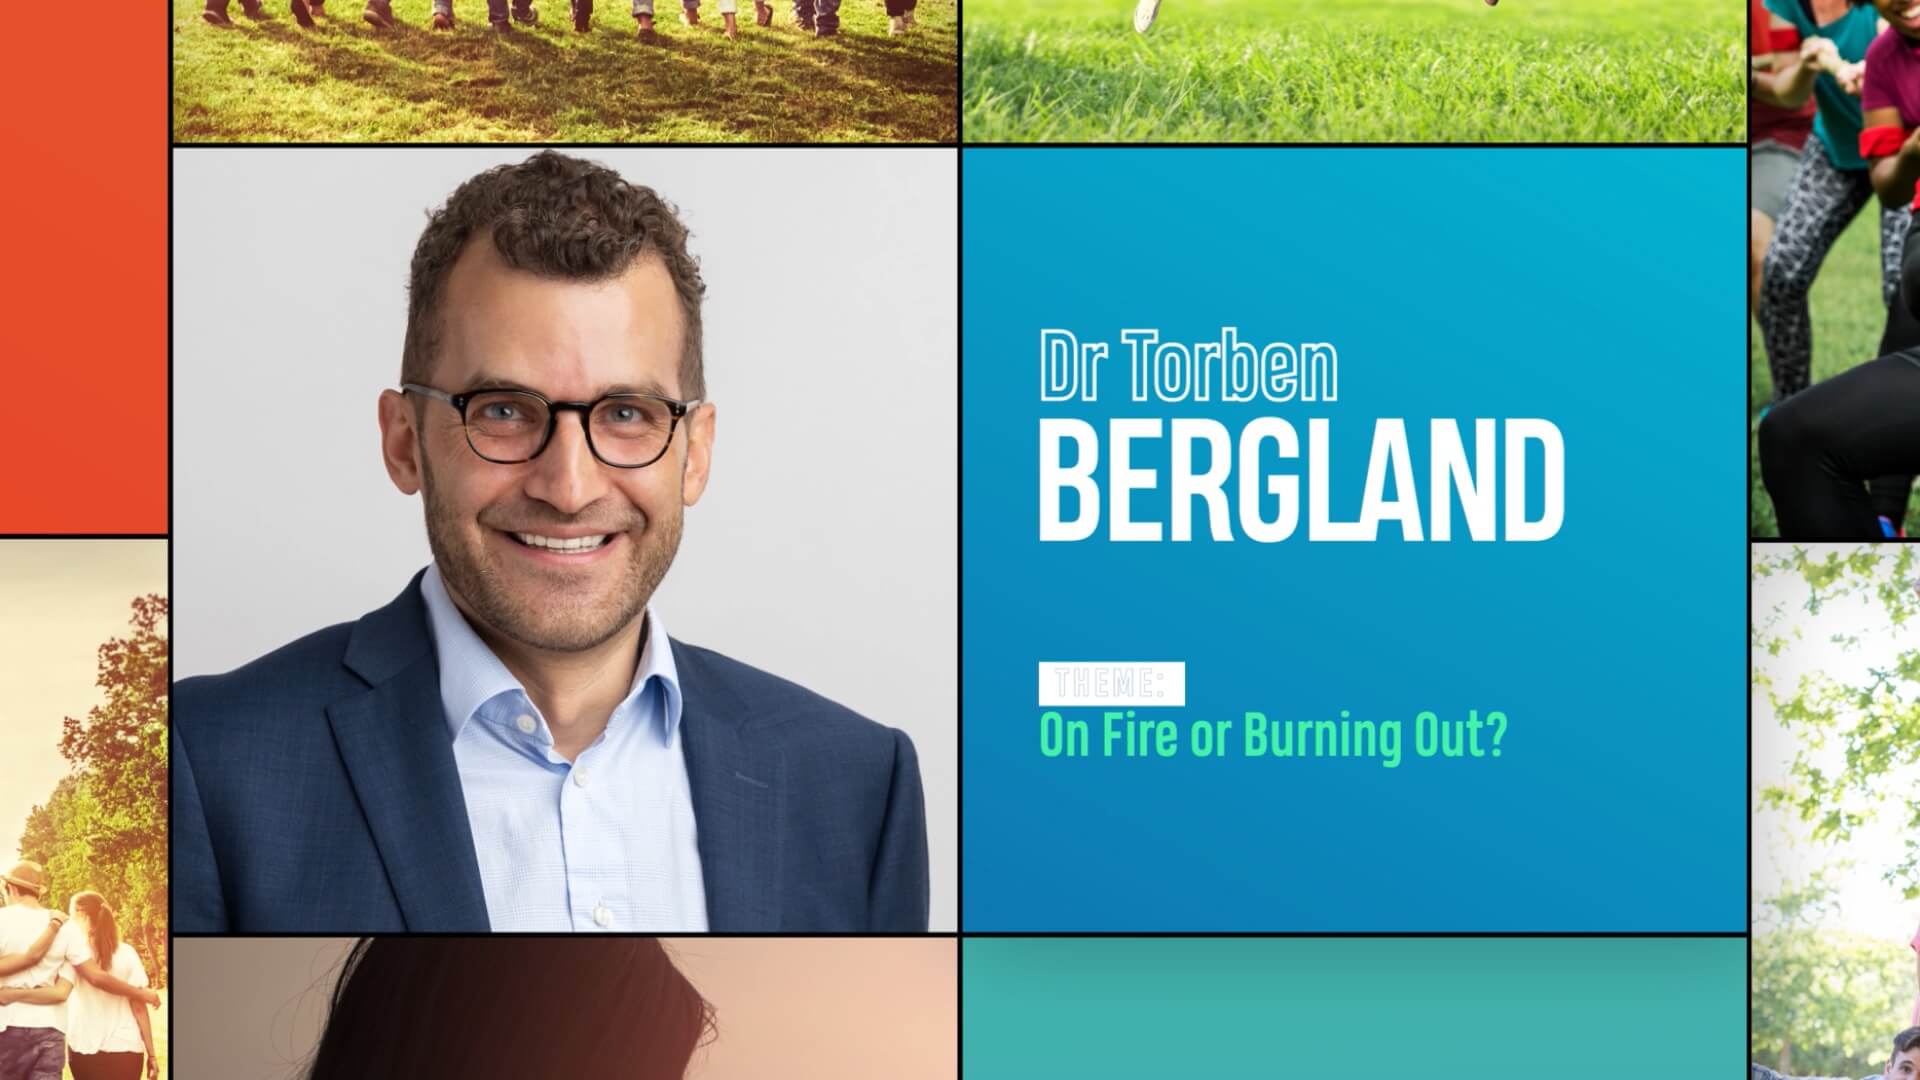 T.Bergland on fire or burning out